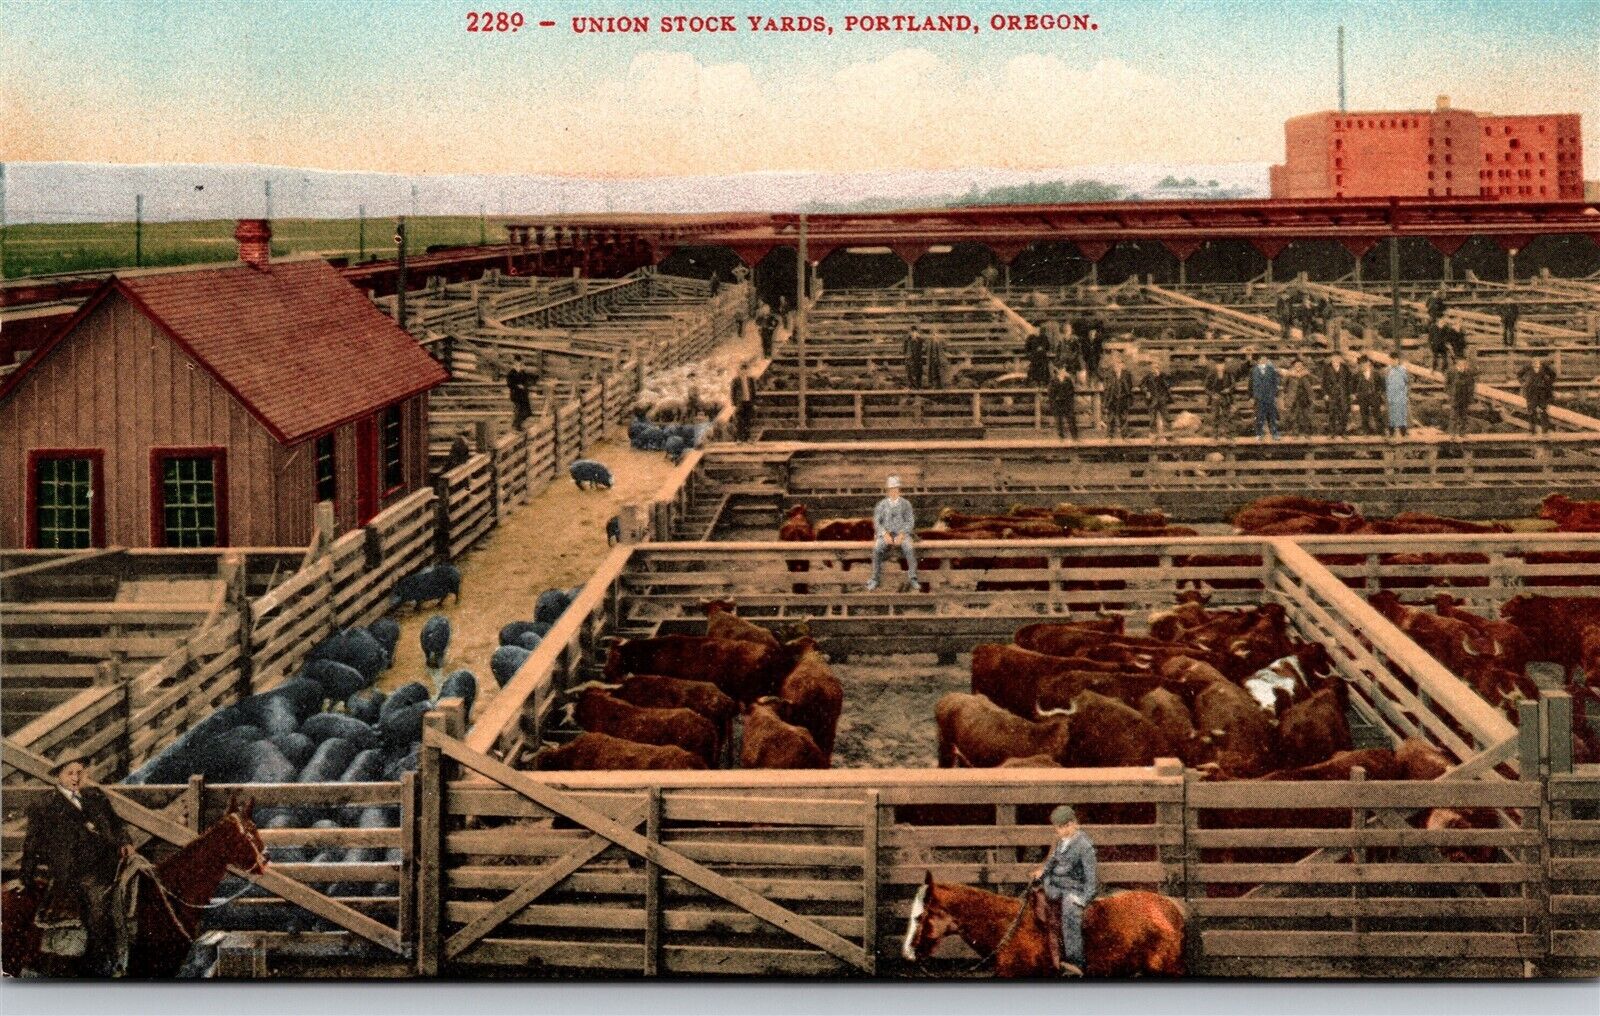 Portland OR Union Stock Yards Old Vtg Postcard View c1910s Cows Cattle Pens